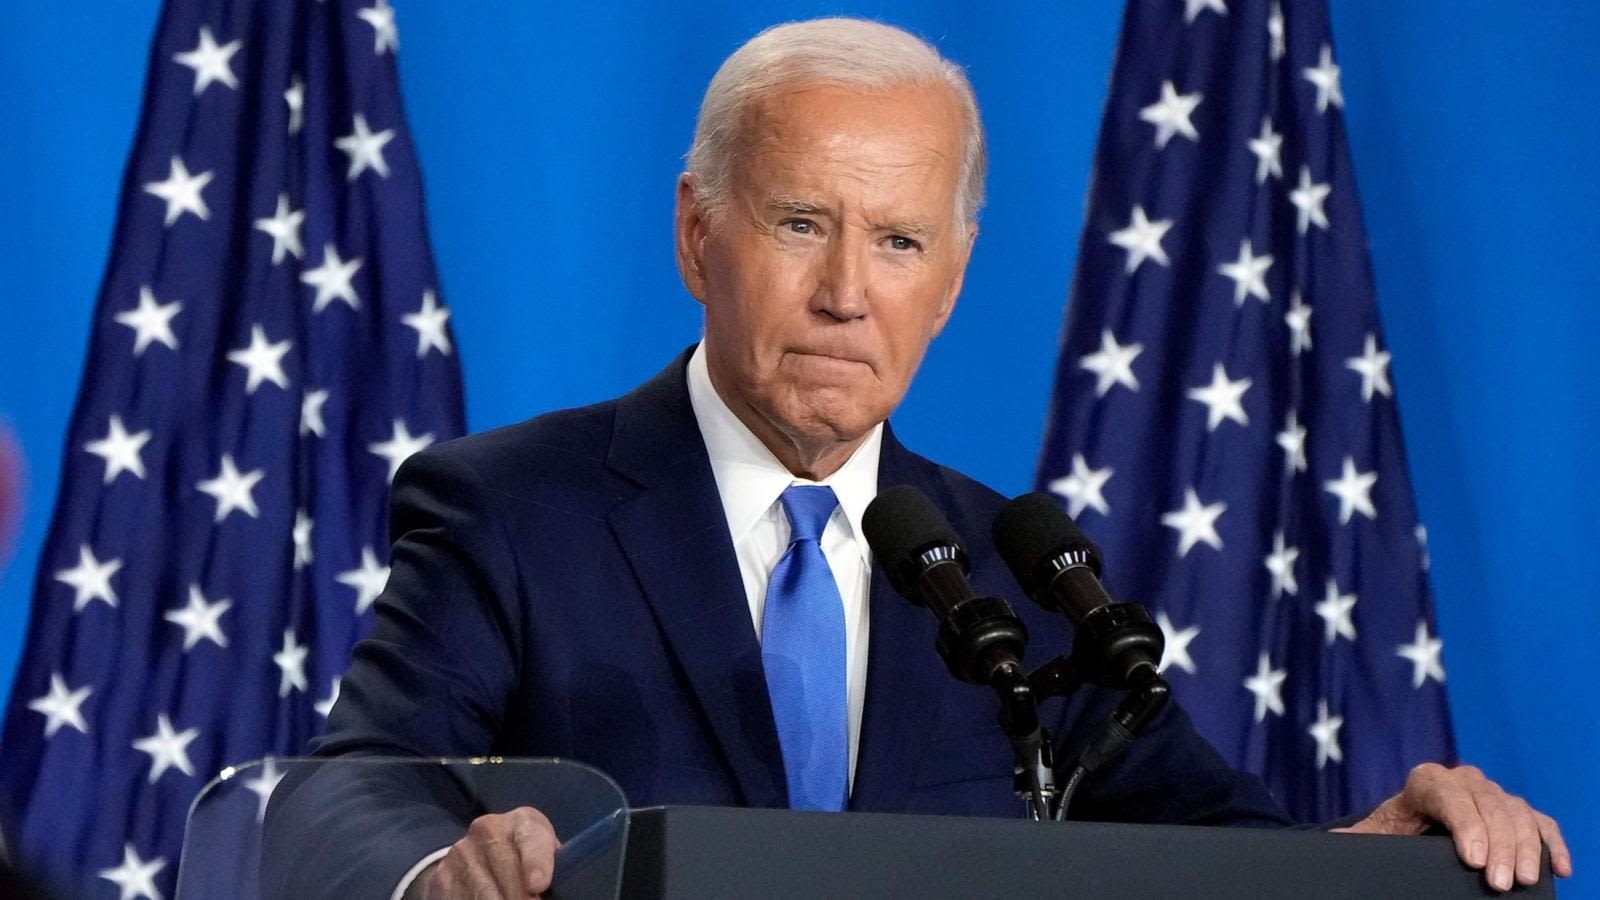 How to watch President Biden's speech tonight on dropping out of the 2024 race